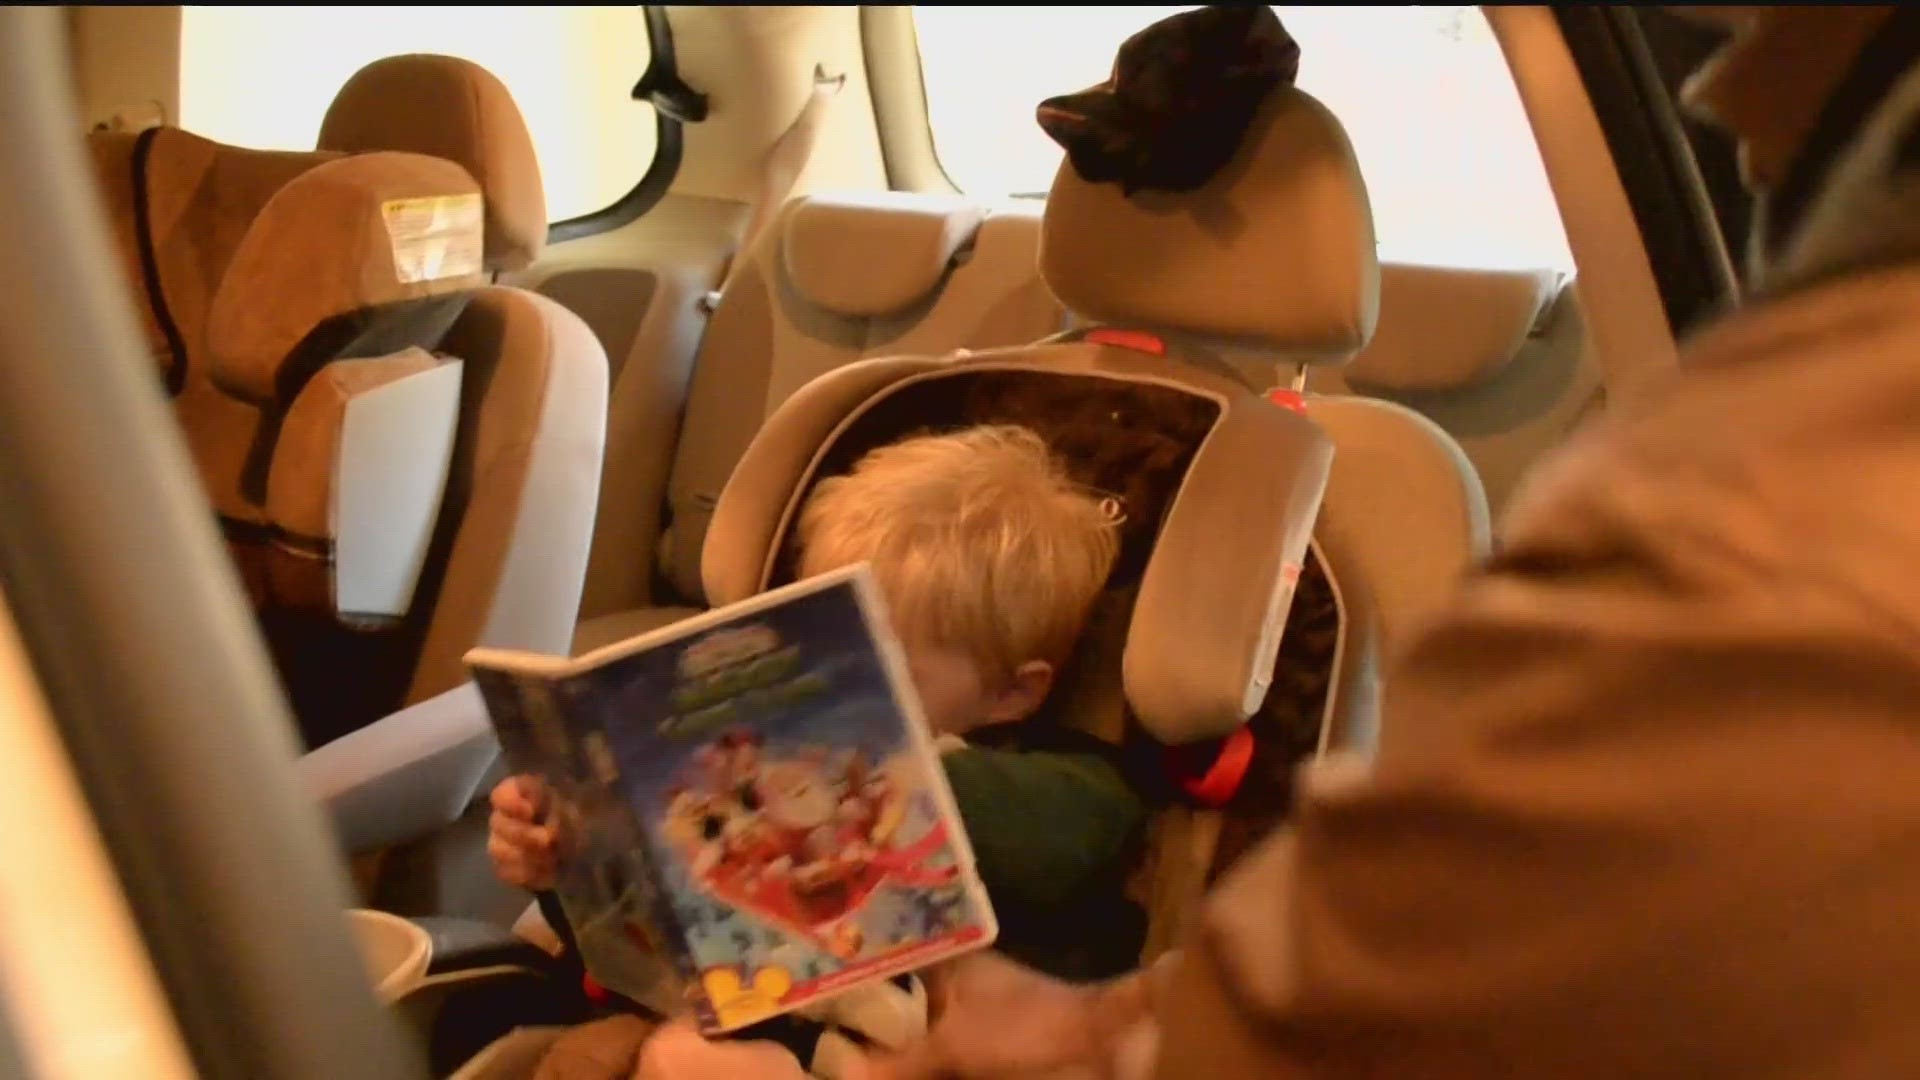 Experts said that properly installed car seats can increase chances of survival in a crash.